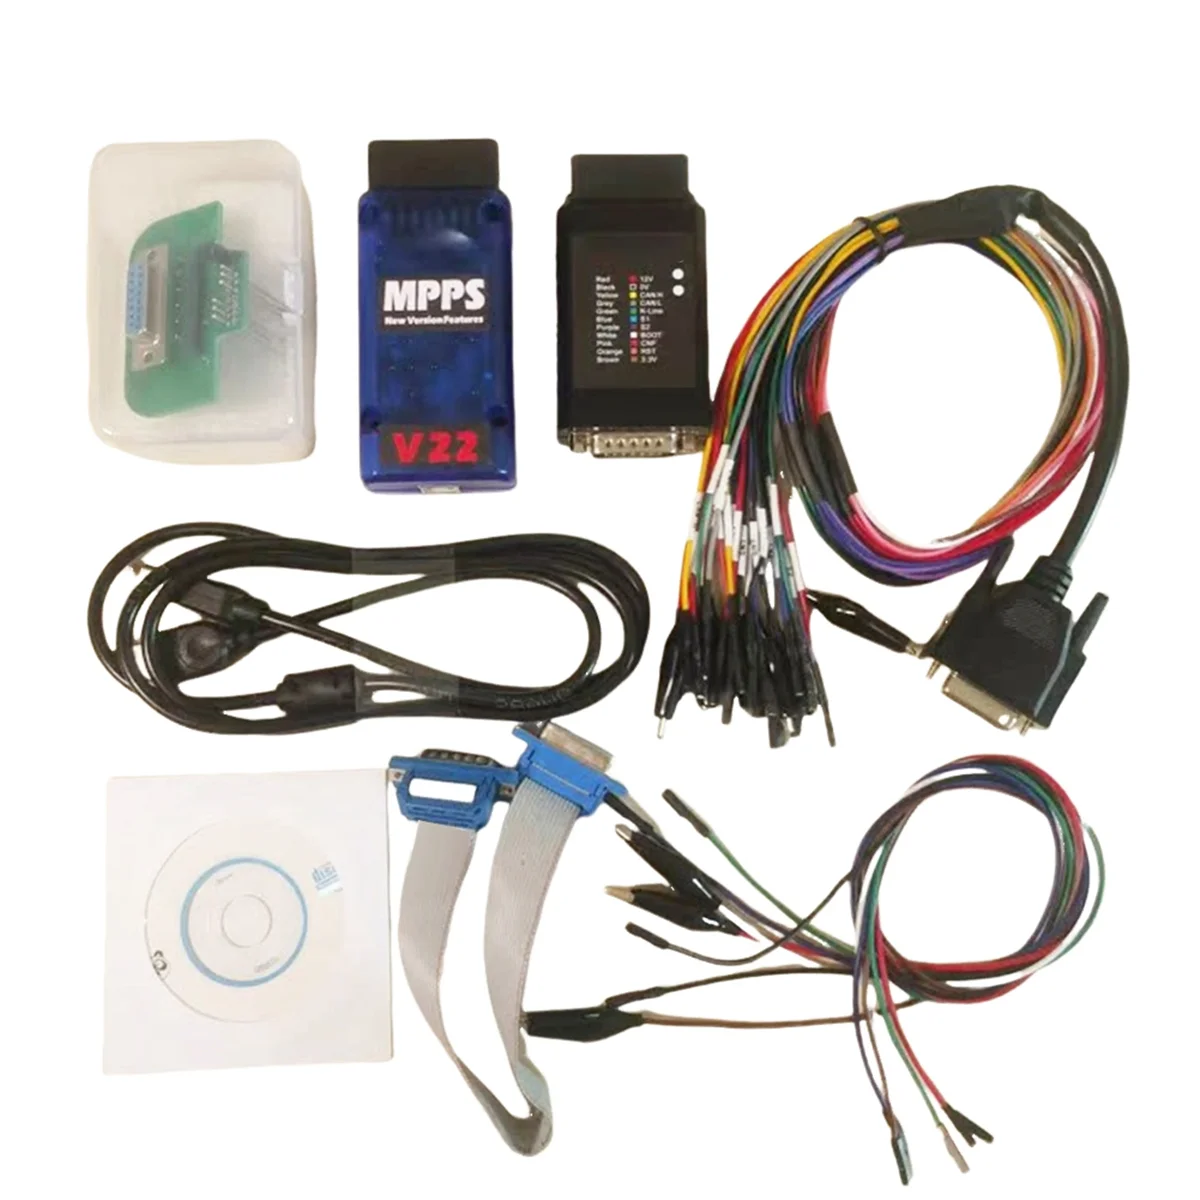 

MPPS V22 MPPS Master V22.2.3.5 ECU Master MAIN Tricore Multiboot Breakout Tricore Cable Chip Tuning Scannerkit